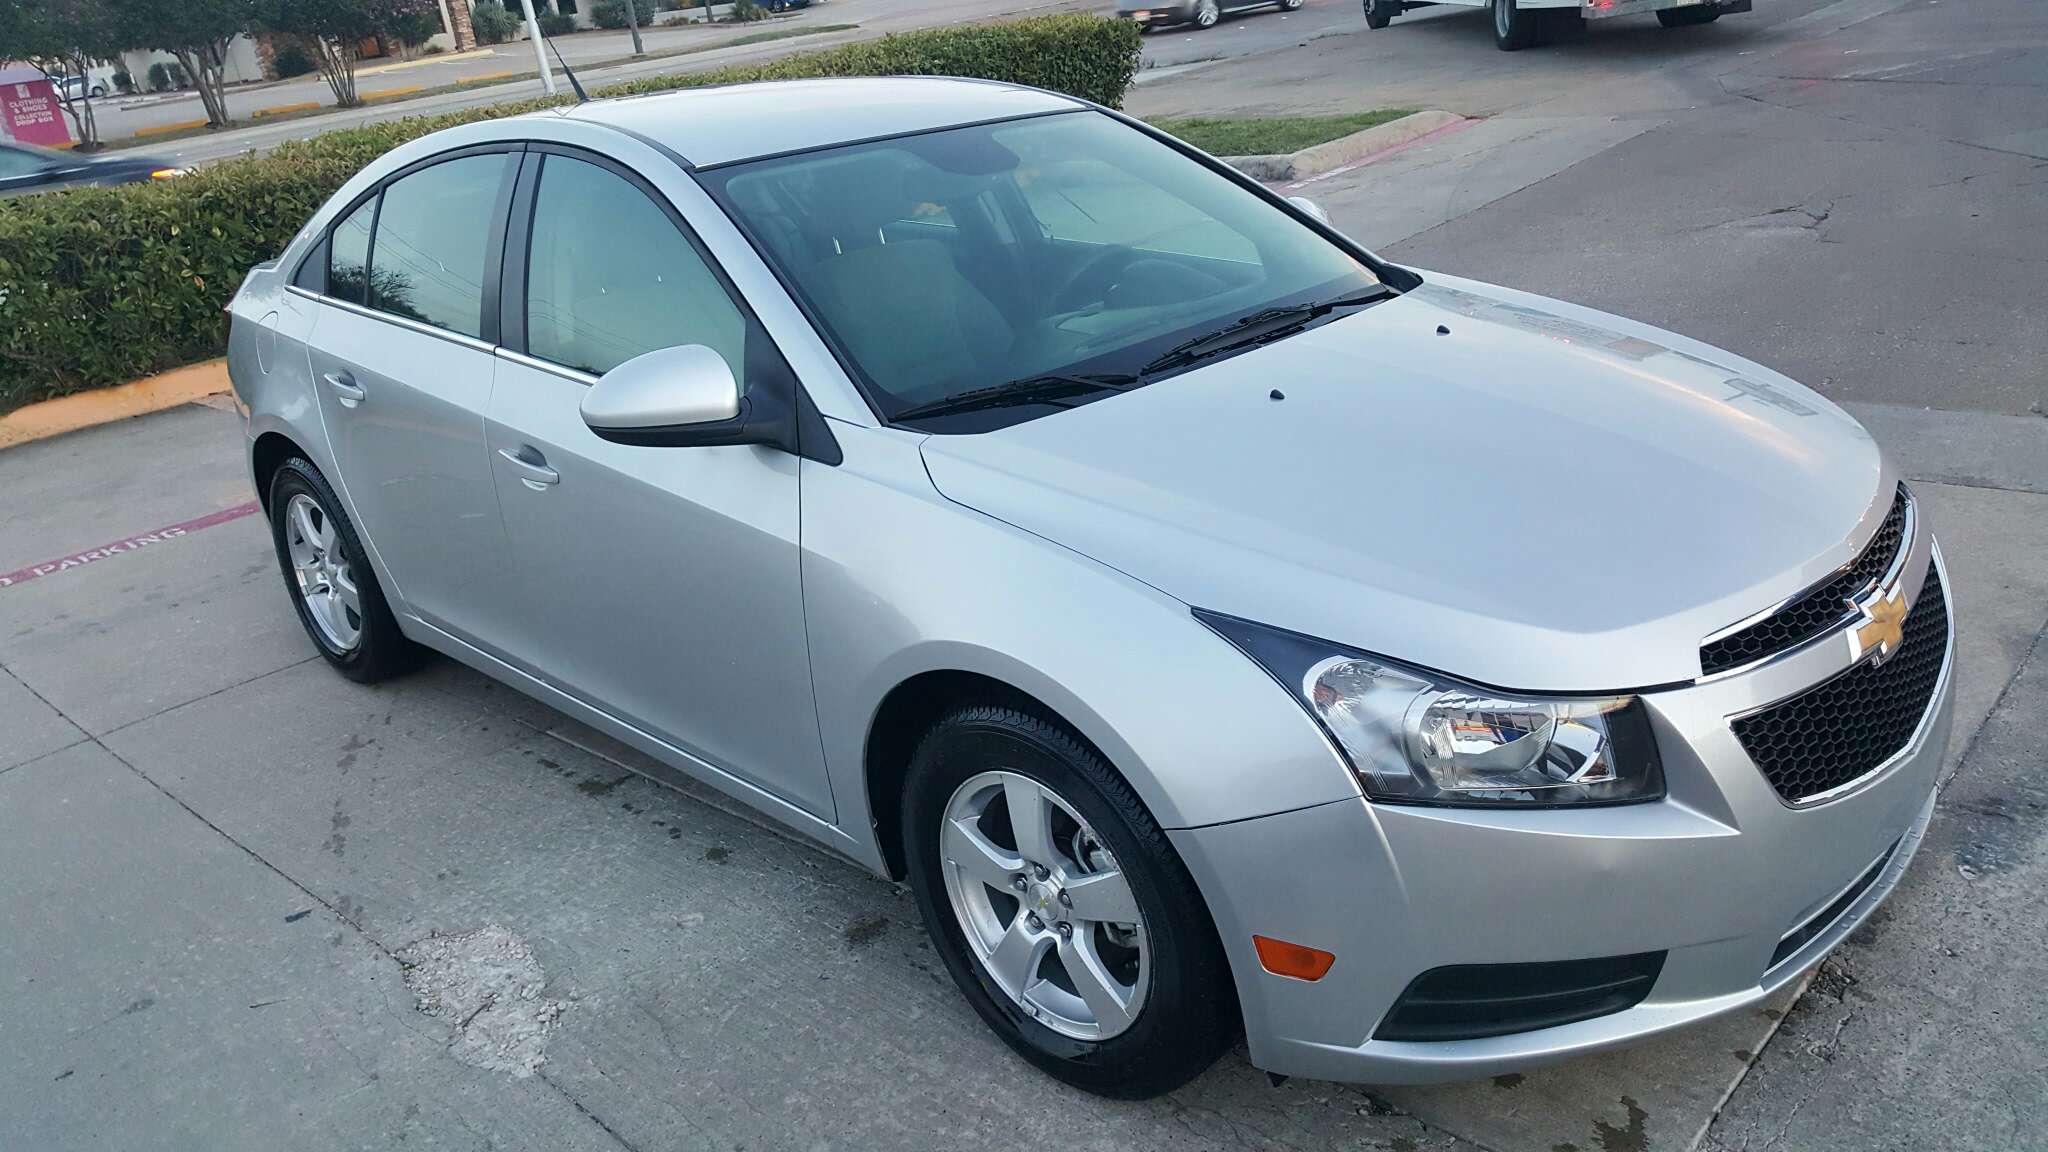 Chevy cruze LT 2014 for sale in Plano, TX - 5miles: Buy and Sell